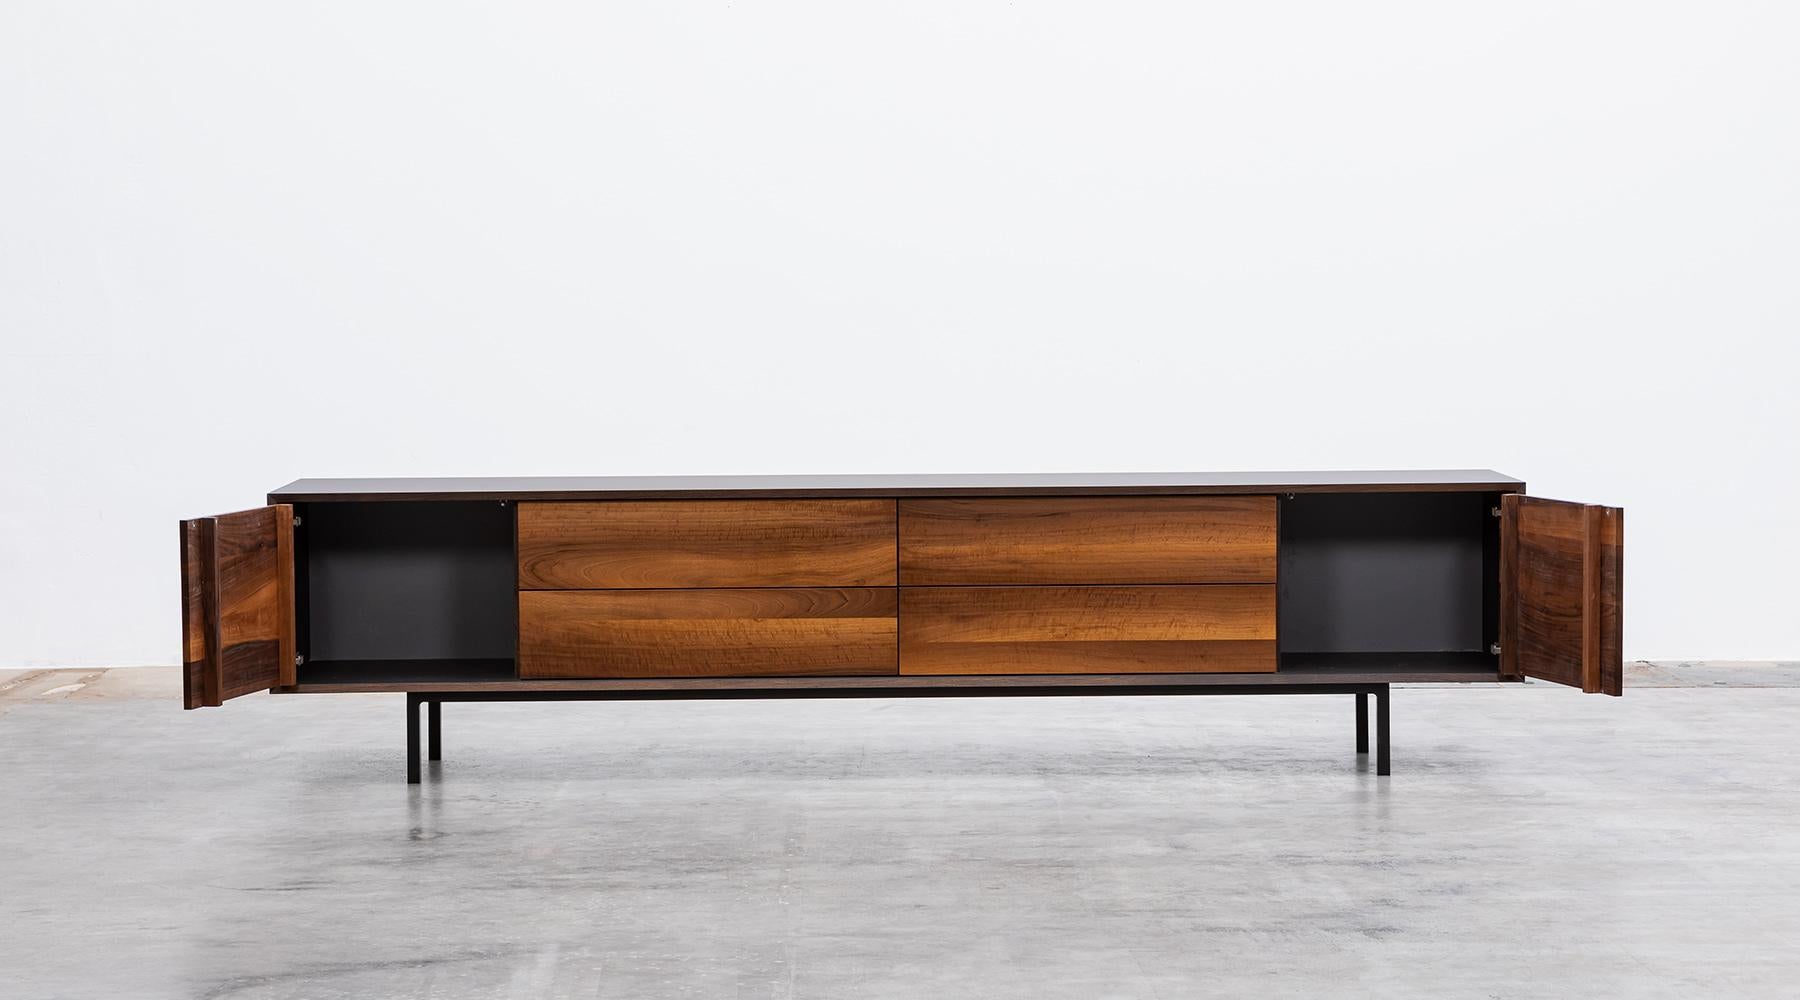 Sideboard by contemporary German artist Johannes Hock. The front of the doors and drawer of this unique piece are made of massive caucasian walnut wood, the corpus is in black hpl on black metal legs. Manufactured by Atelier Johannes Hock.

Hock